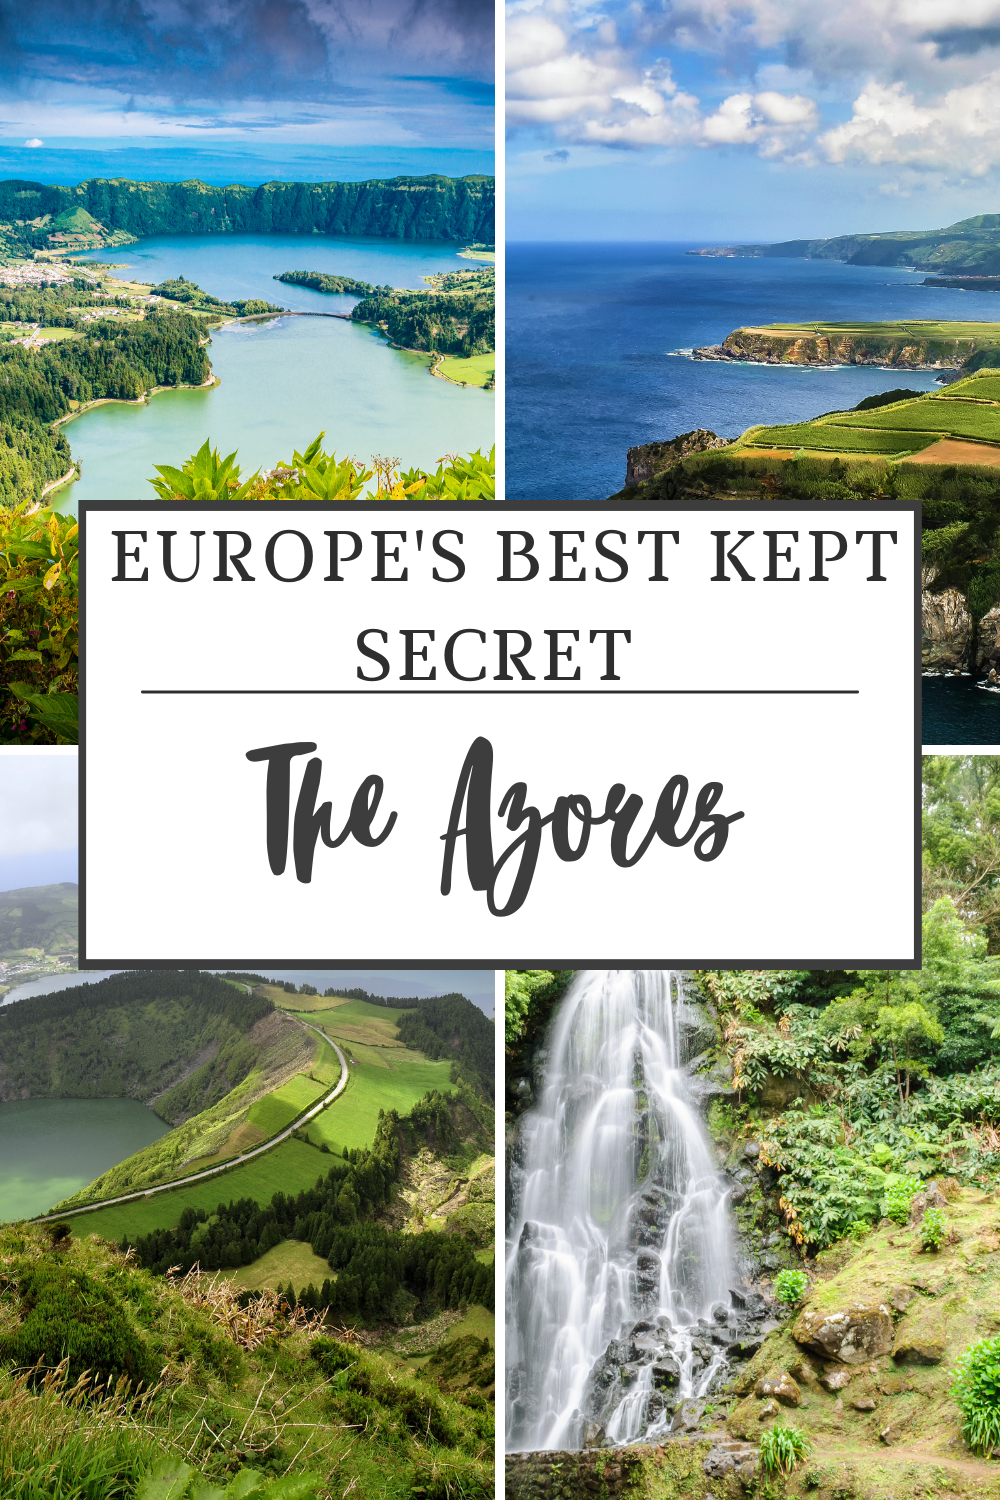 10 reasons to Visit the Azores. An island chain with 9 islands, great for hiking, whale watching, hot springs and volcanoes. With miles of stunning coastline and people few and far between. #portugal #azores 